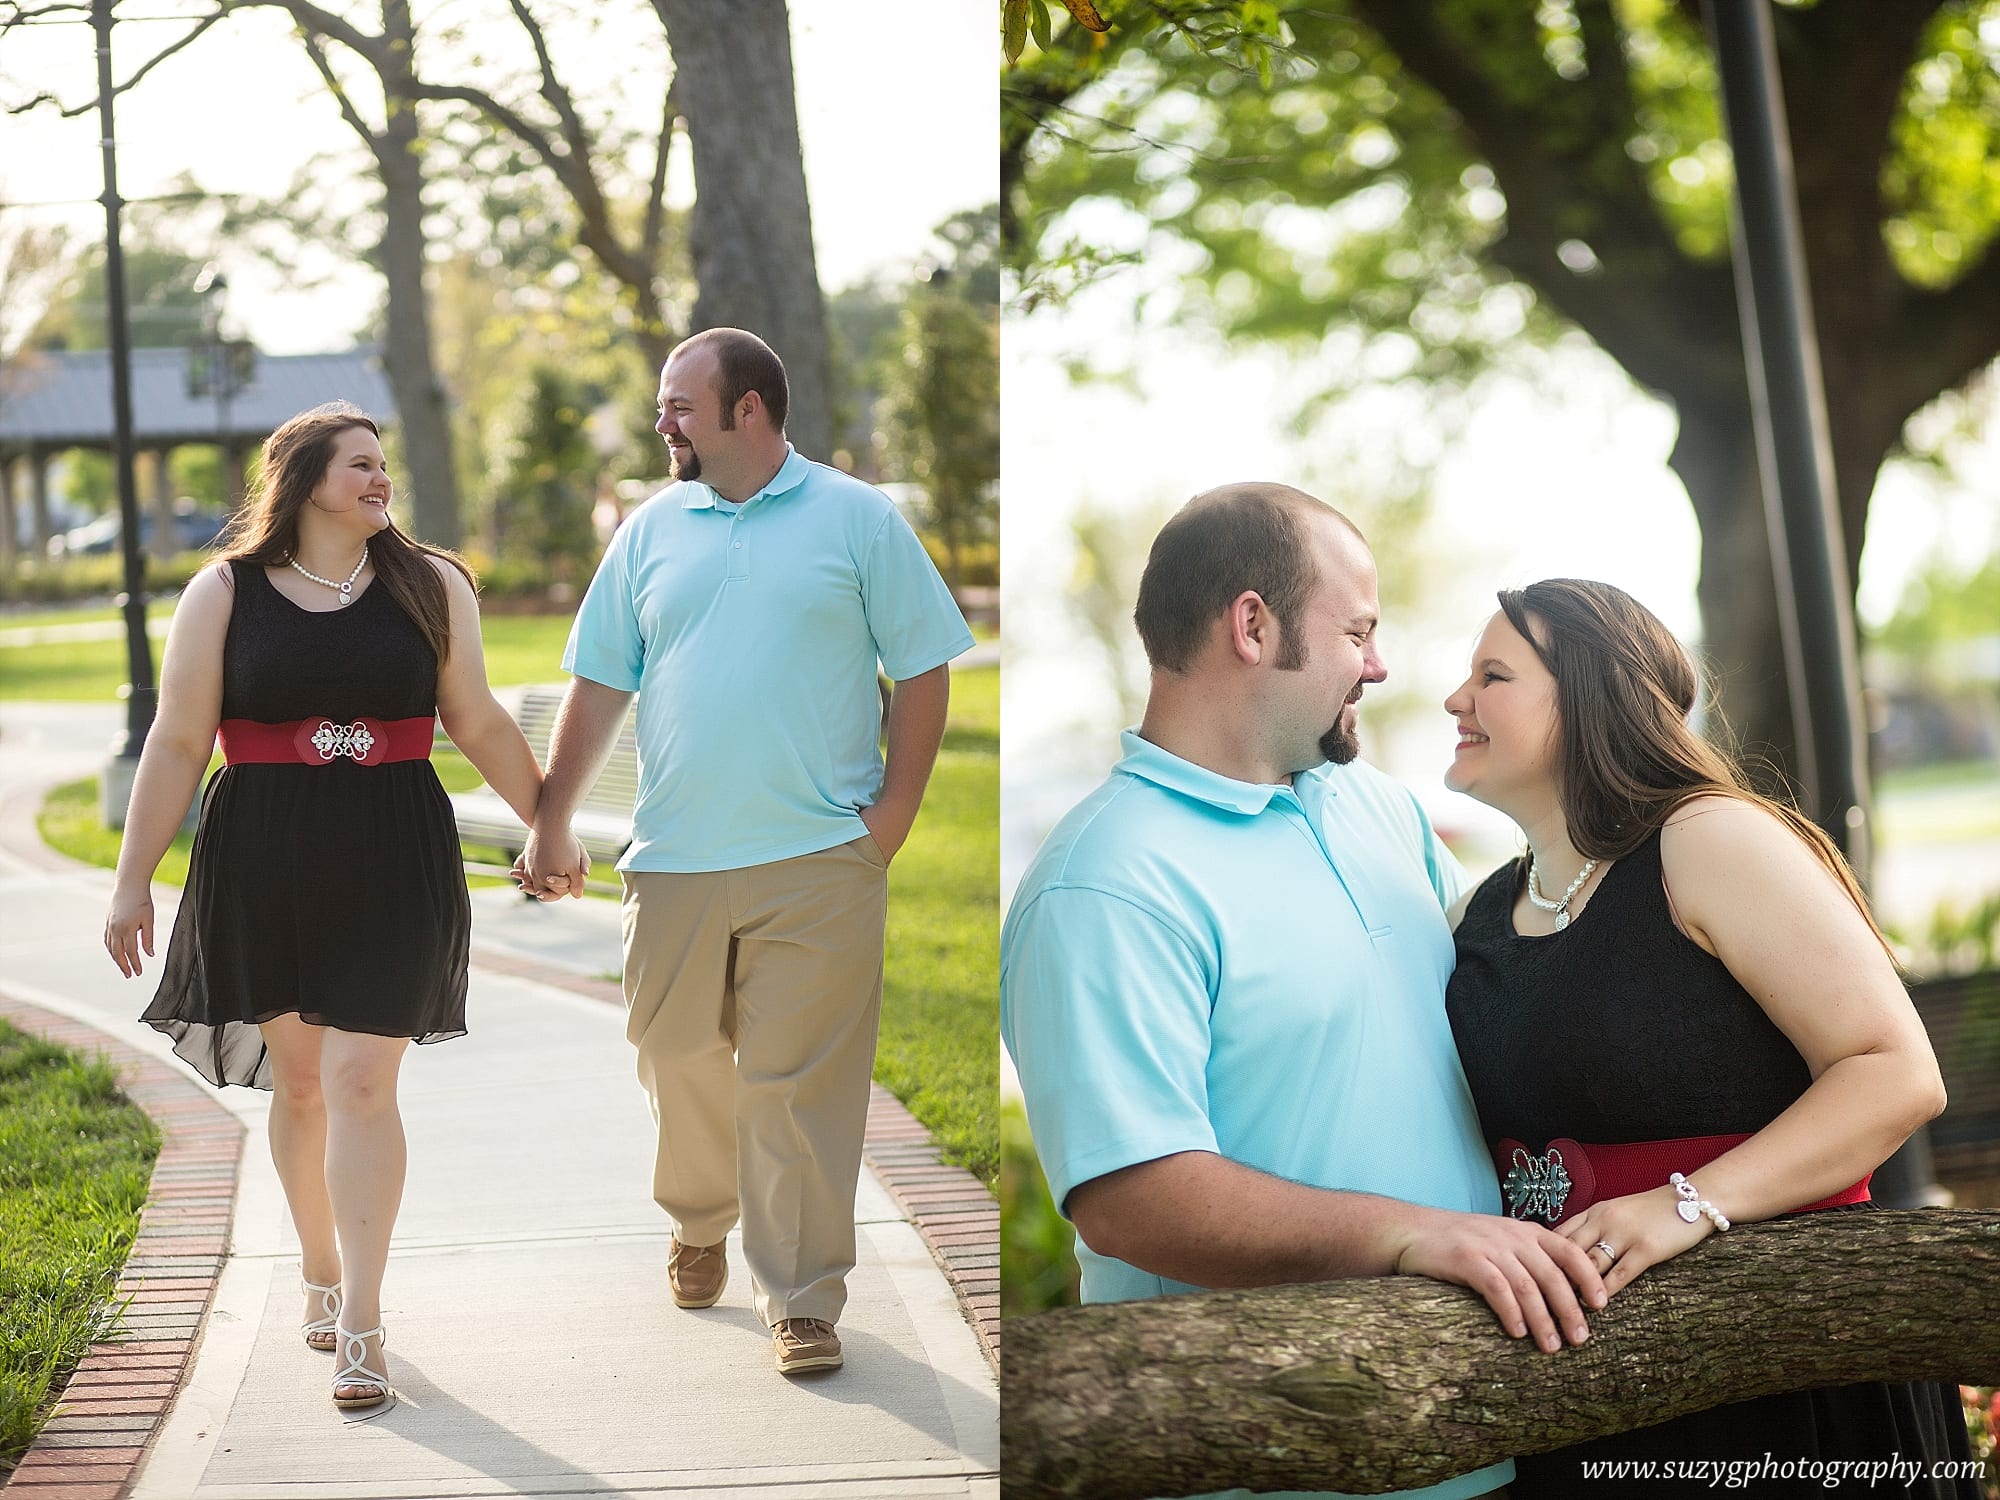 engagements-new orleans-texas-baton rouge-lake charles-suzy g-photography-suzygphotography_0030